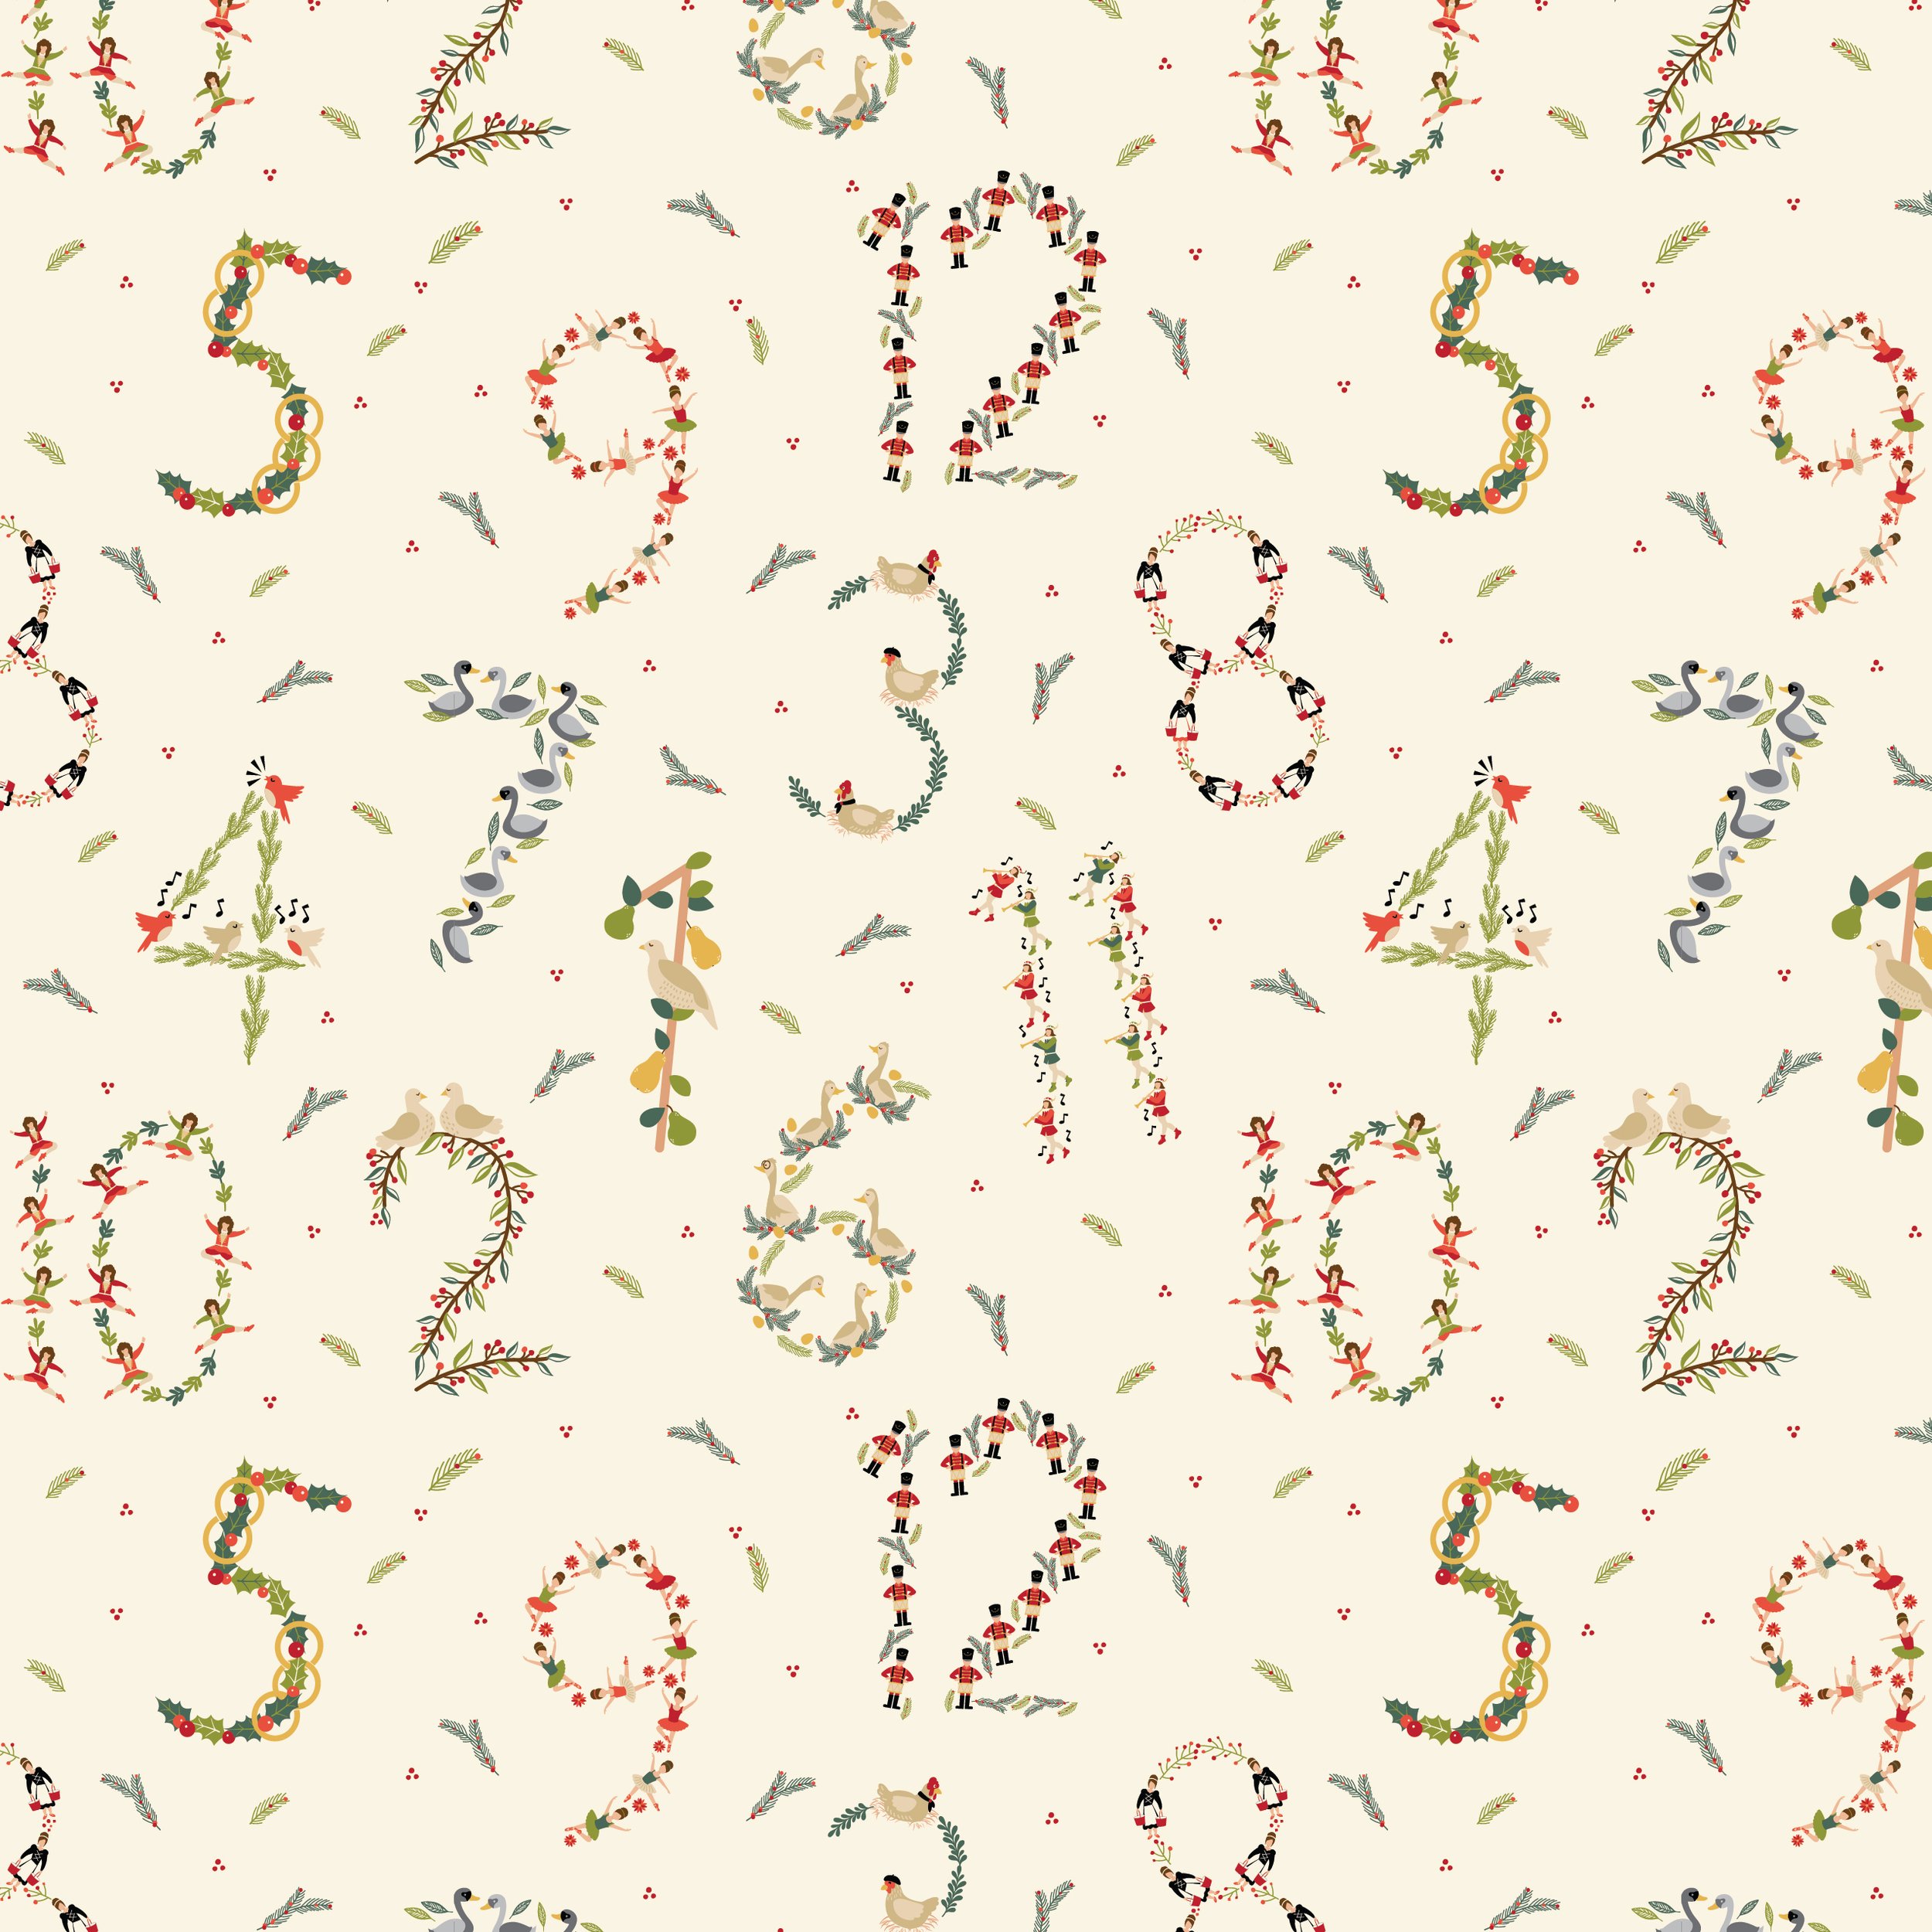 DC-2308_12-Days-Scattered_TOASTED_PATTERN_sq.jpg